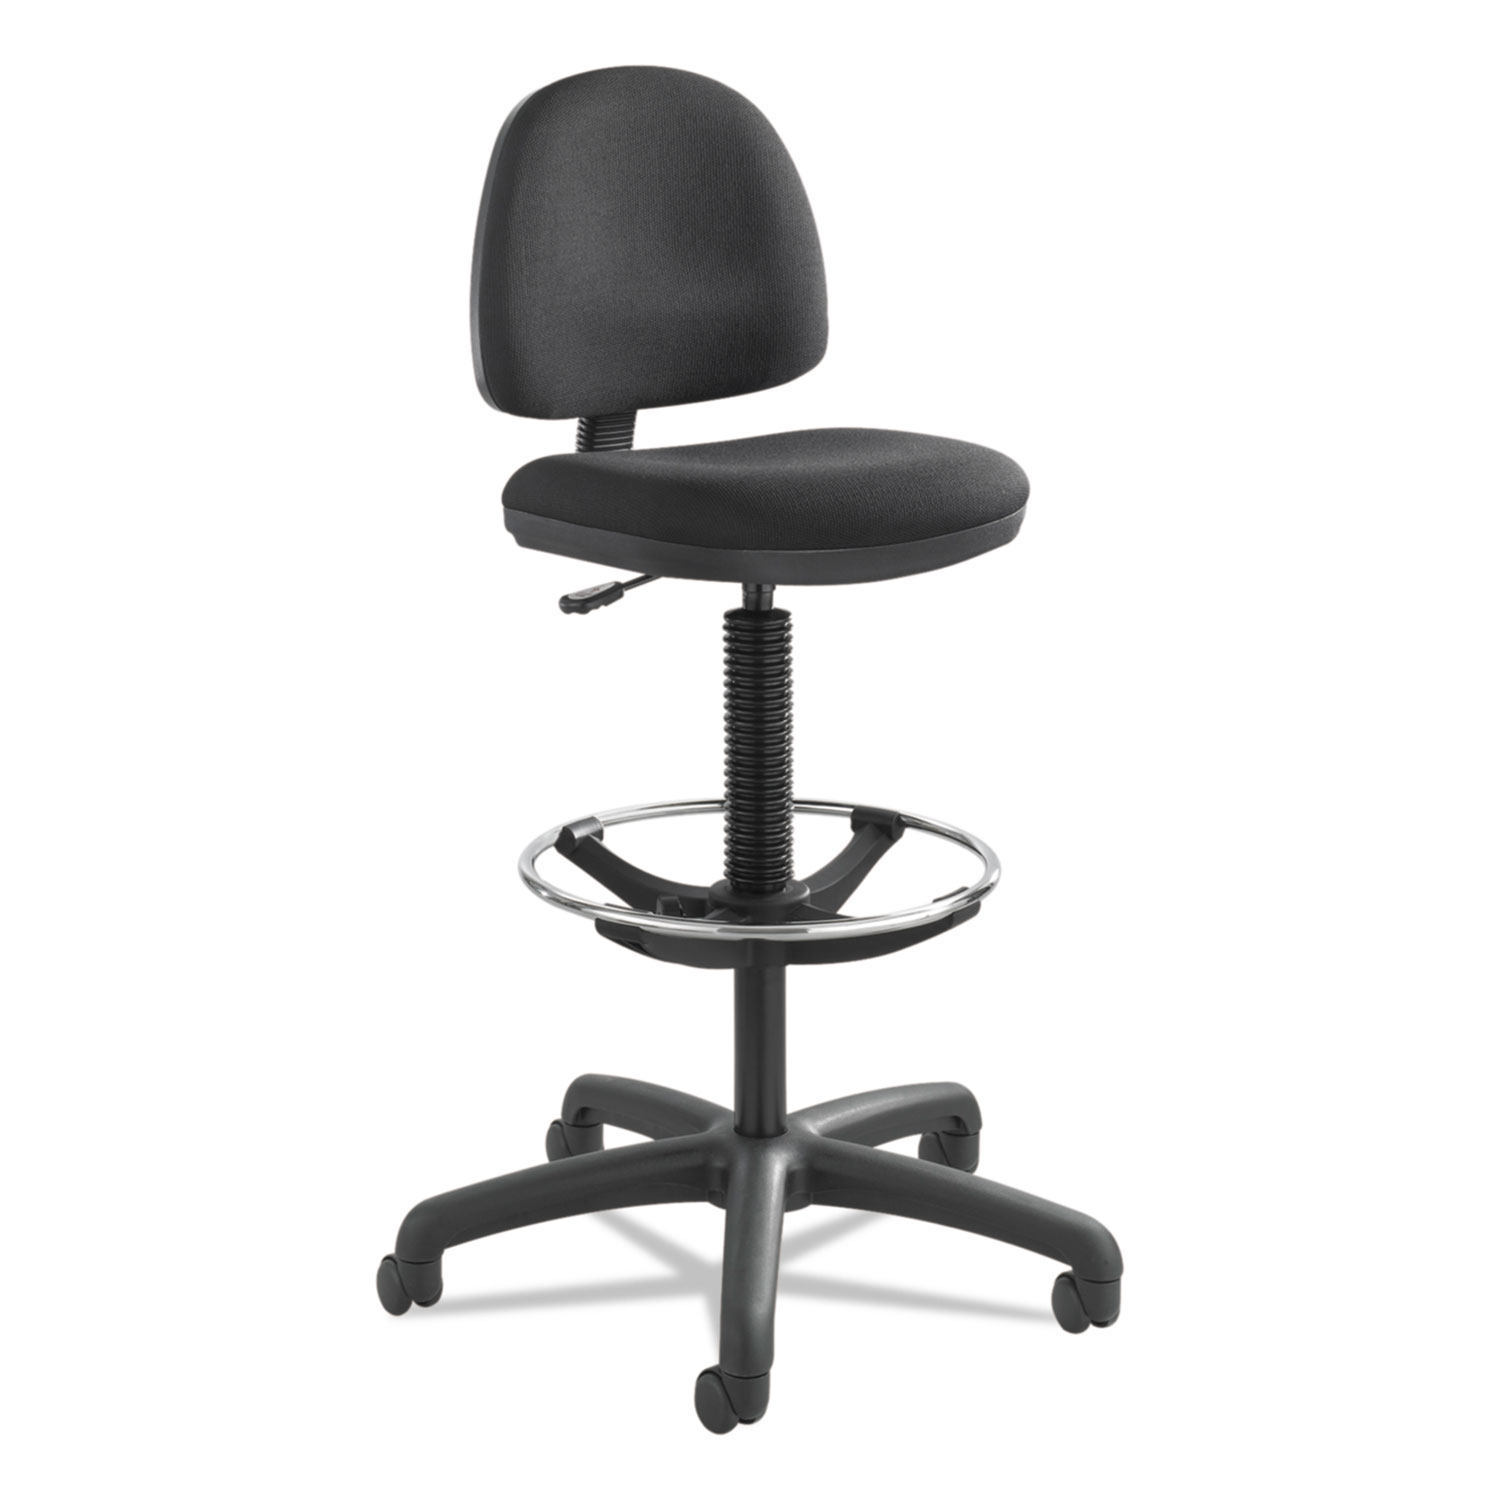  Safco 3401BL Precision Extended-Height Swivel Stool with Adjustable Footring, 33 Seat Height, Up to 250 lbs., Black Seat/Back, Black Base (SAF3401BL) 